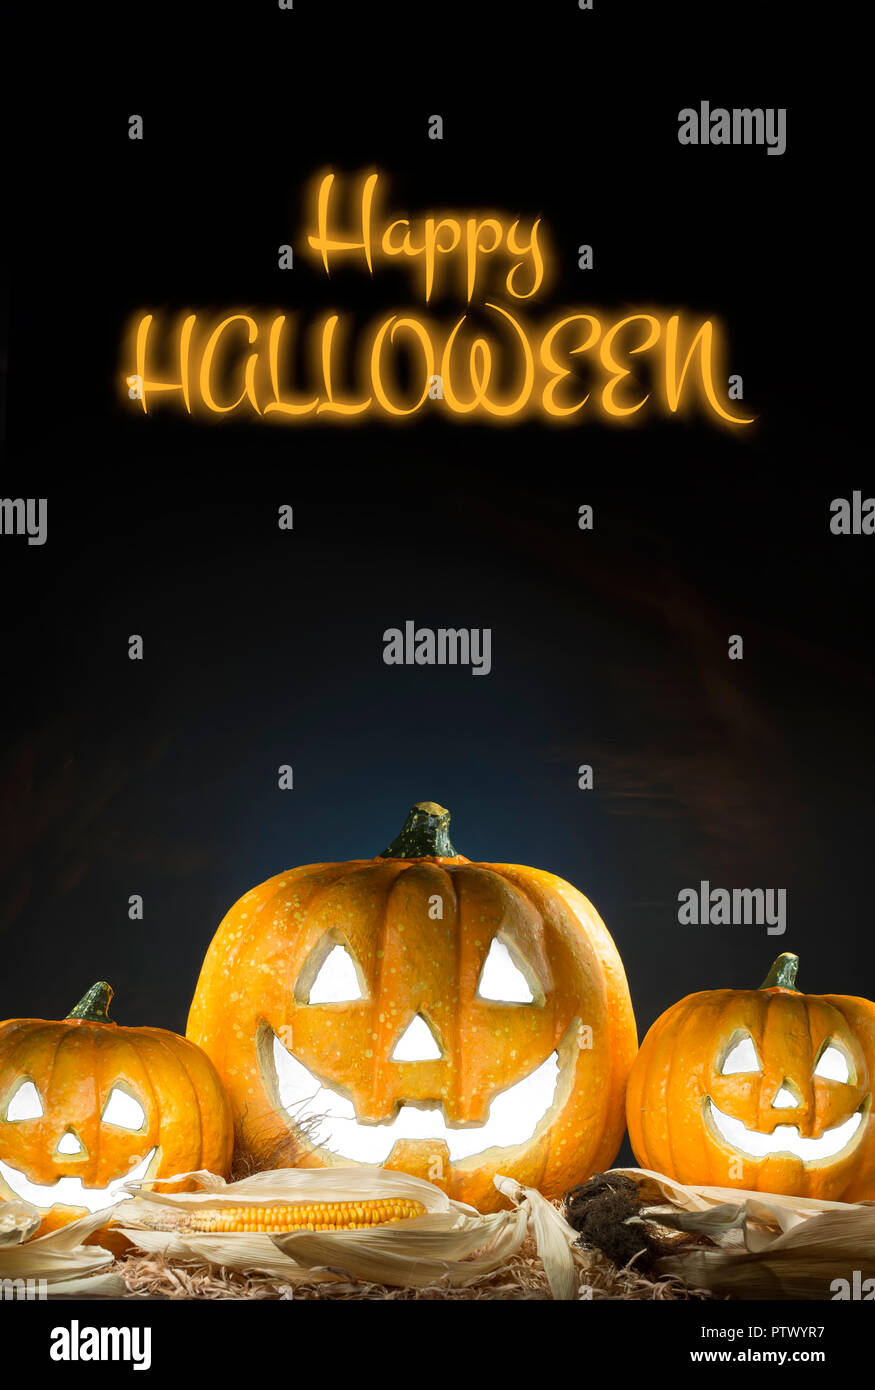 Happy halloween poster, halloween party festive banner, copy space Stock Photo